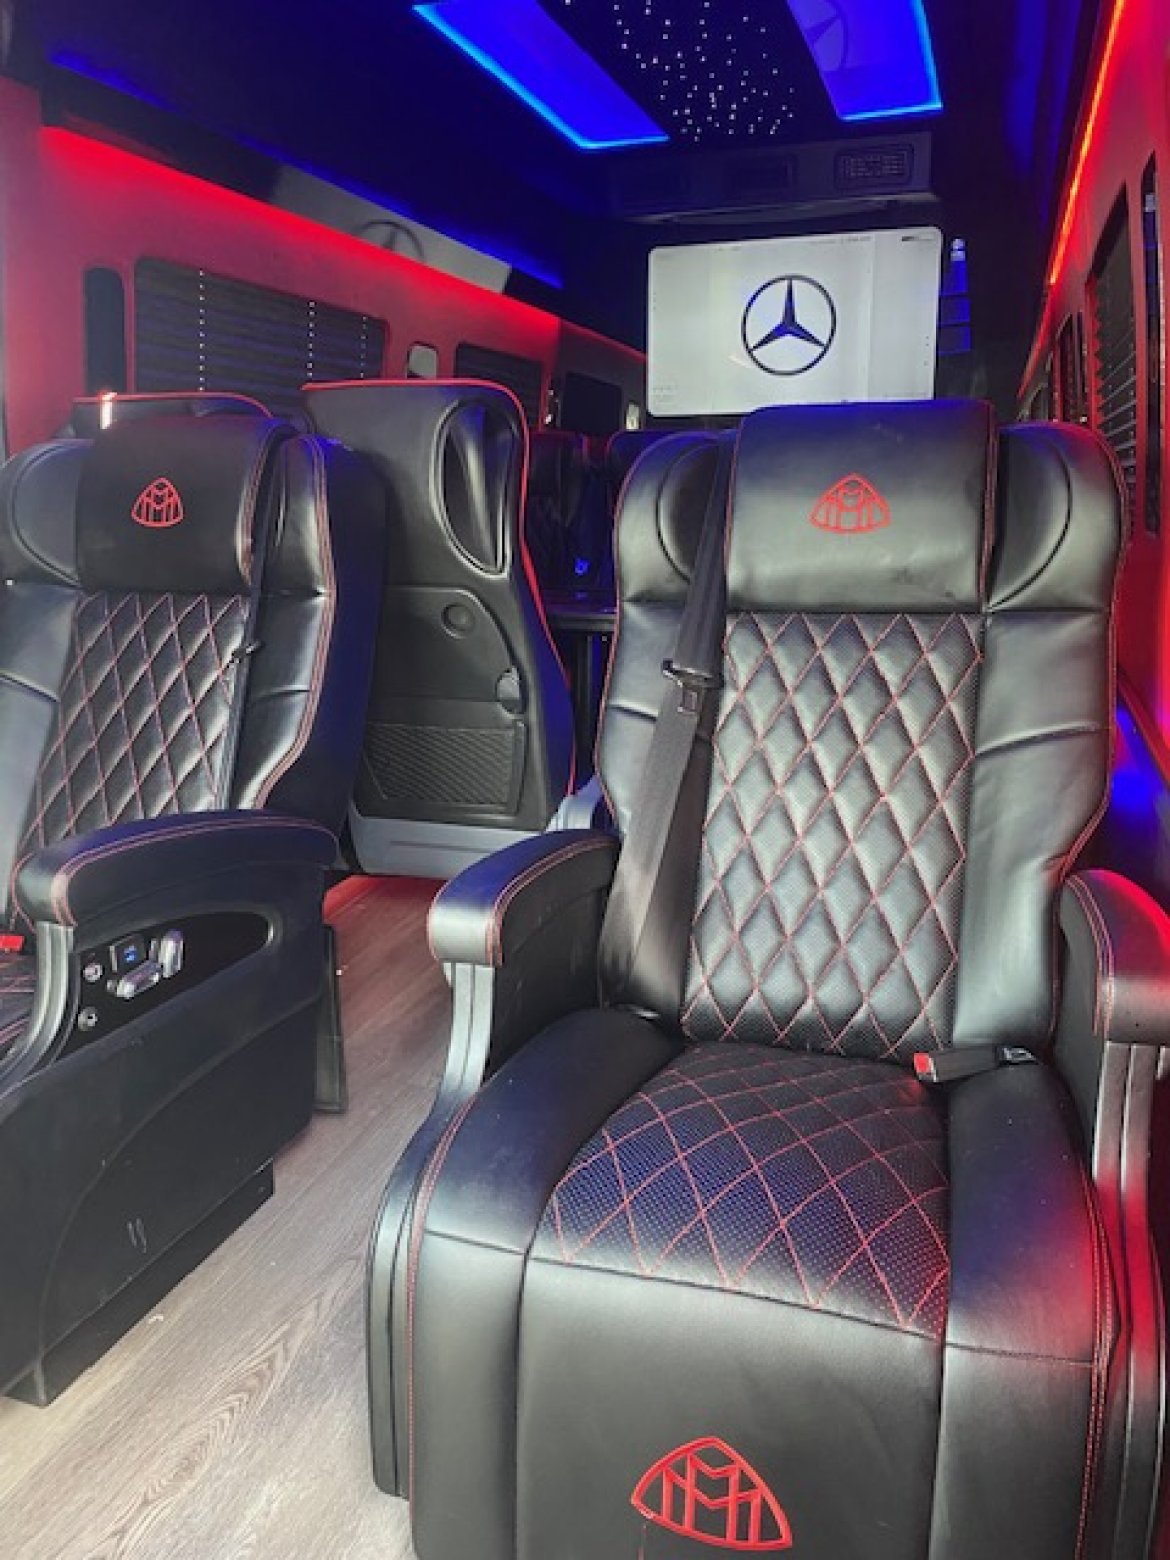 CEO SUV Mobile Office for sale: 2021 Mercedes-Benz CEO Style Sprinter by CE